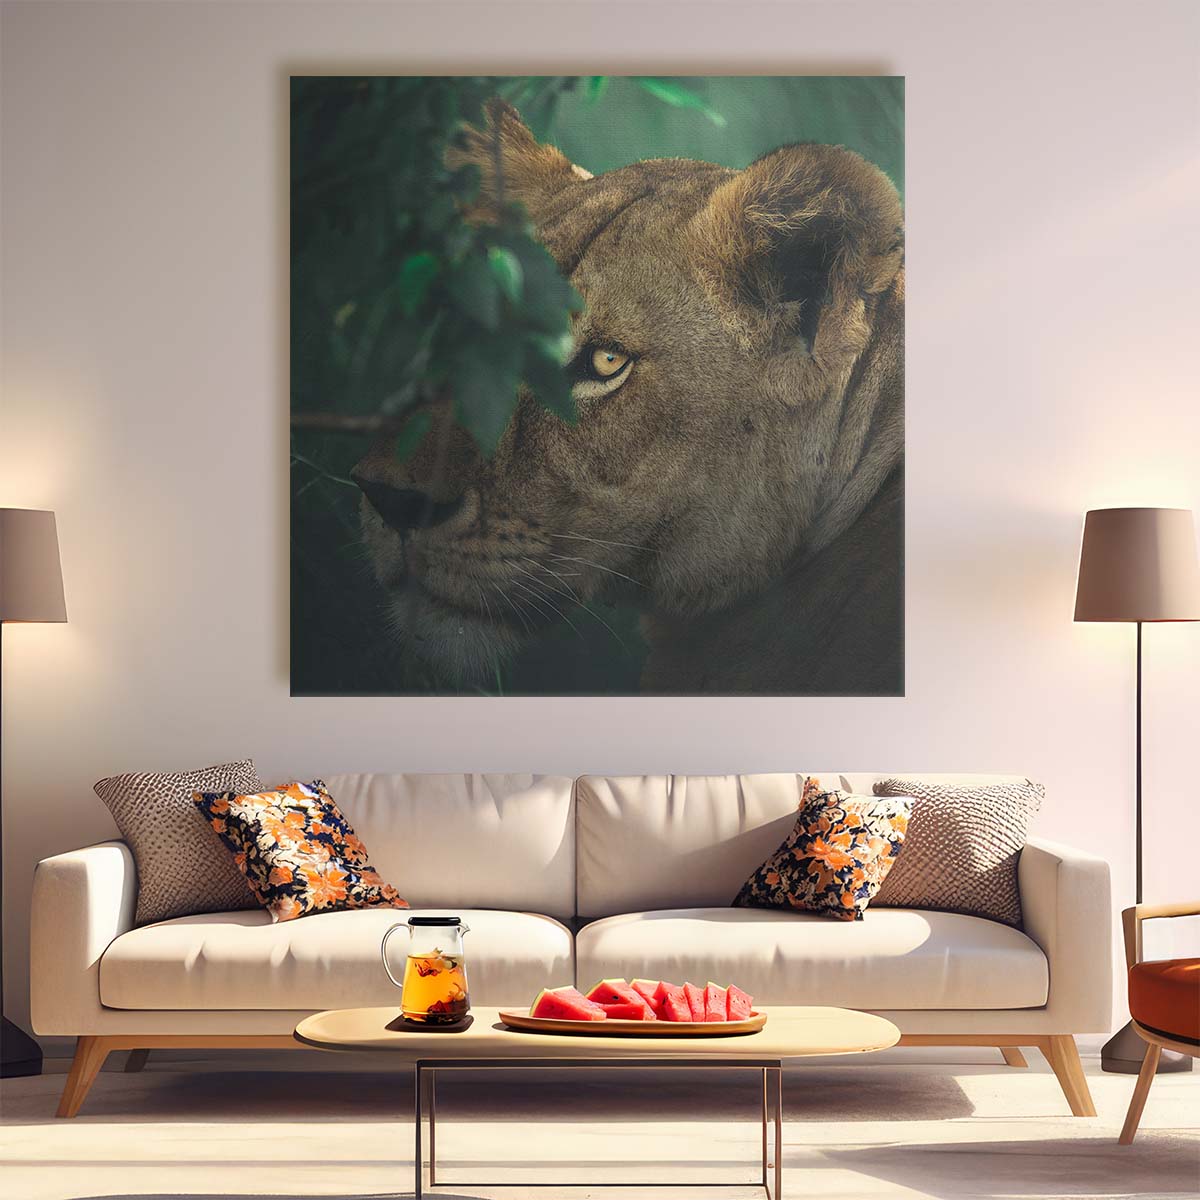 Lioness with Green Eyes Wildlife Photography Wall Art by Luxuriance Designs. Made in USA.